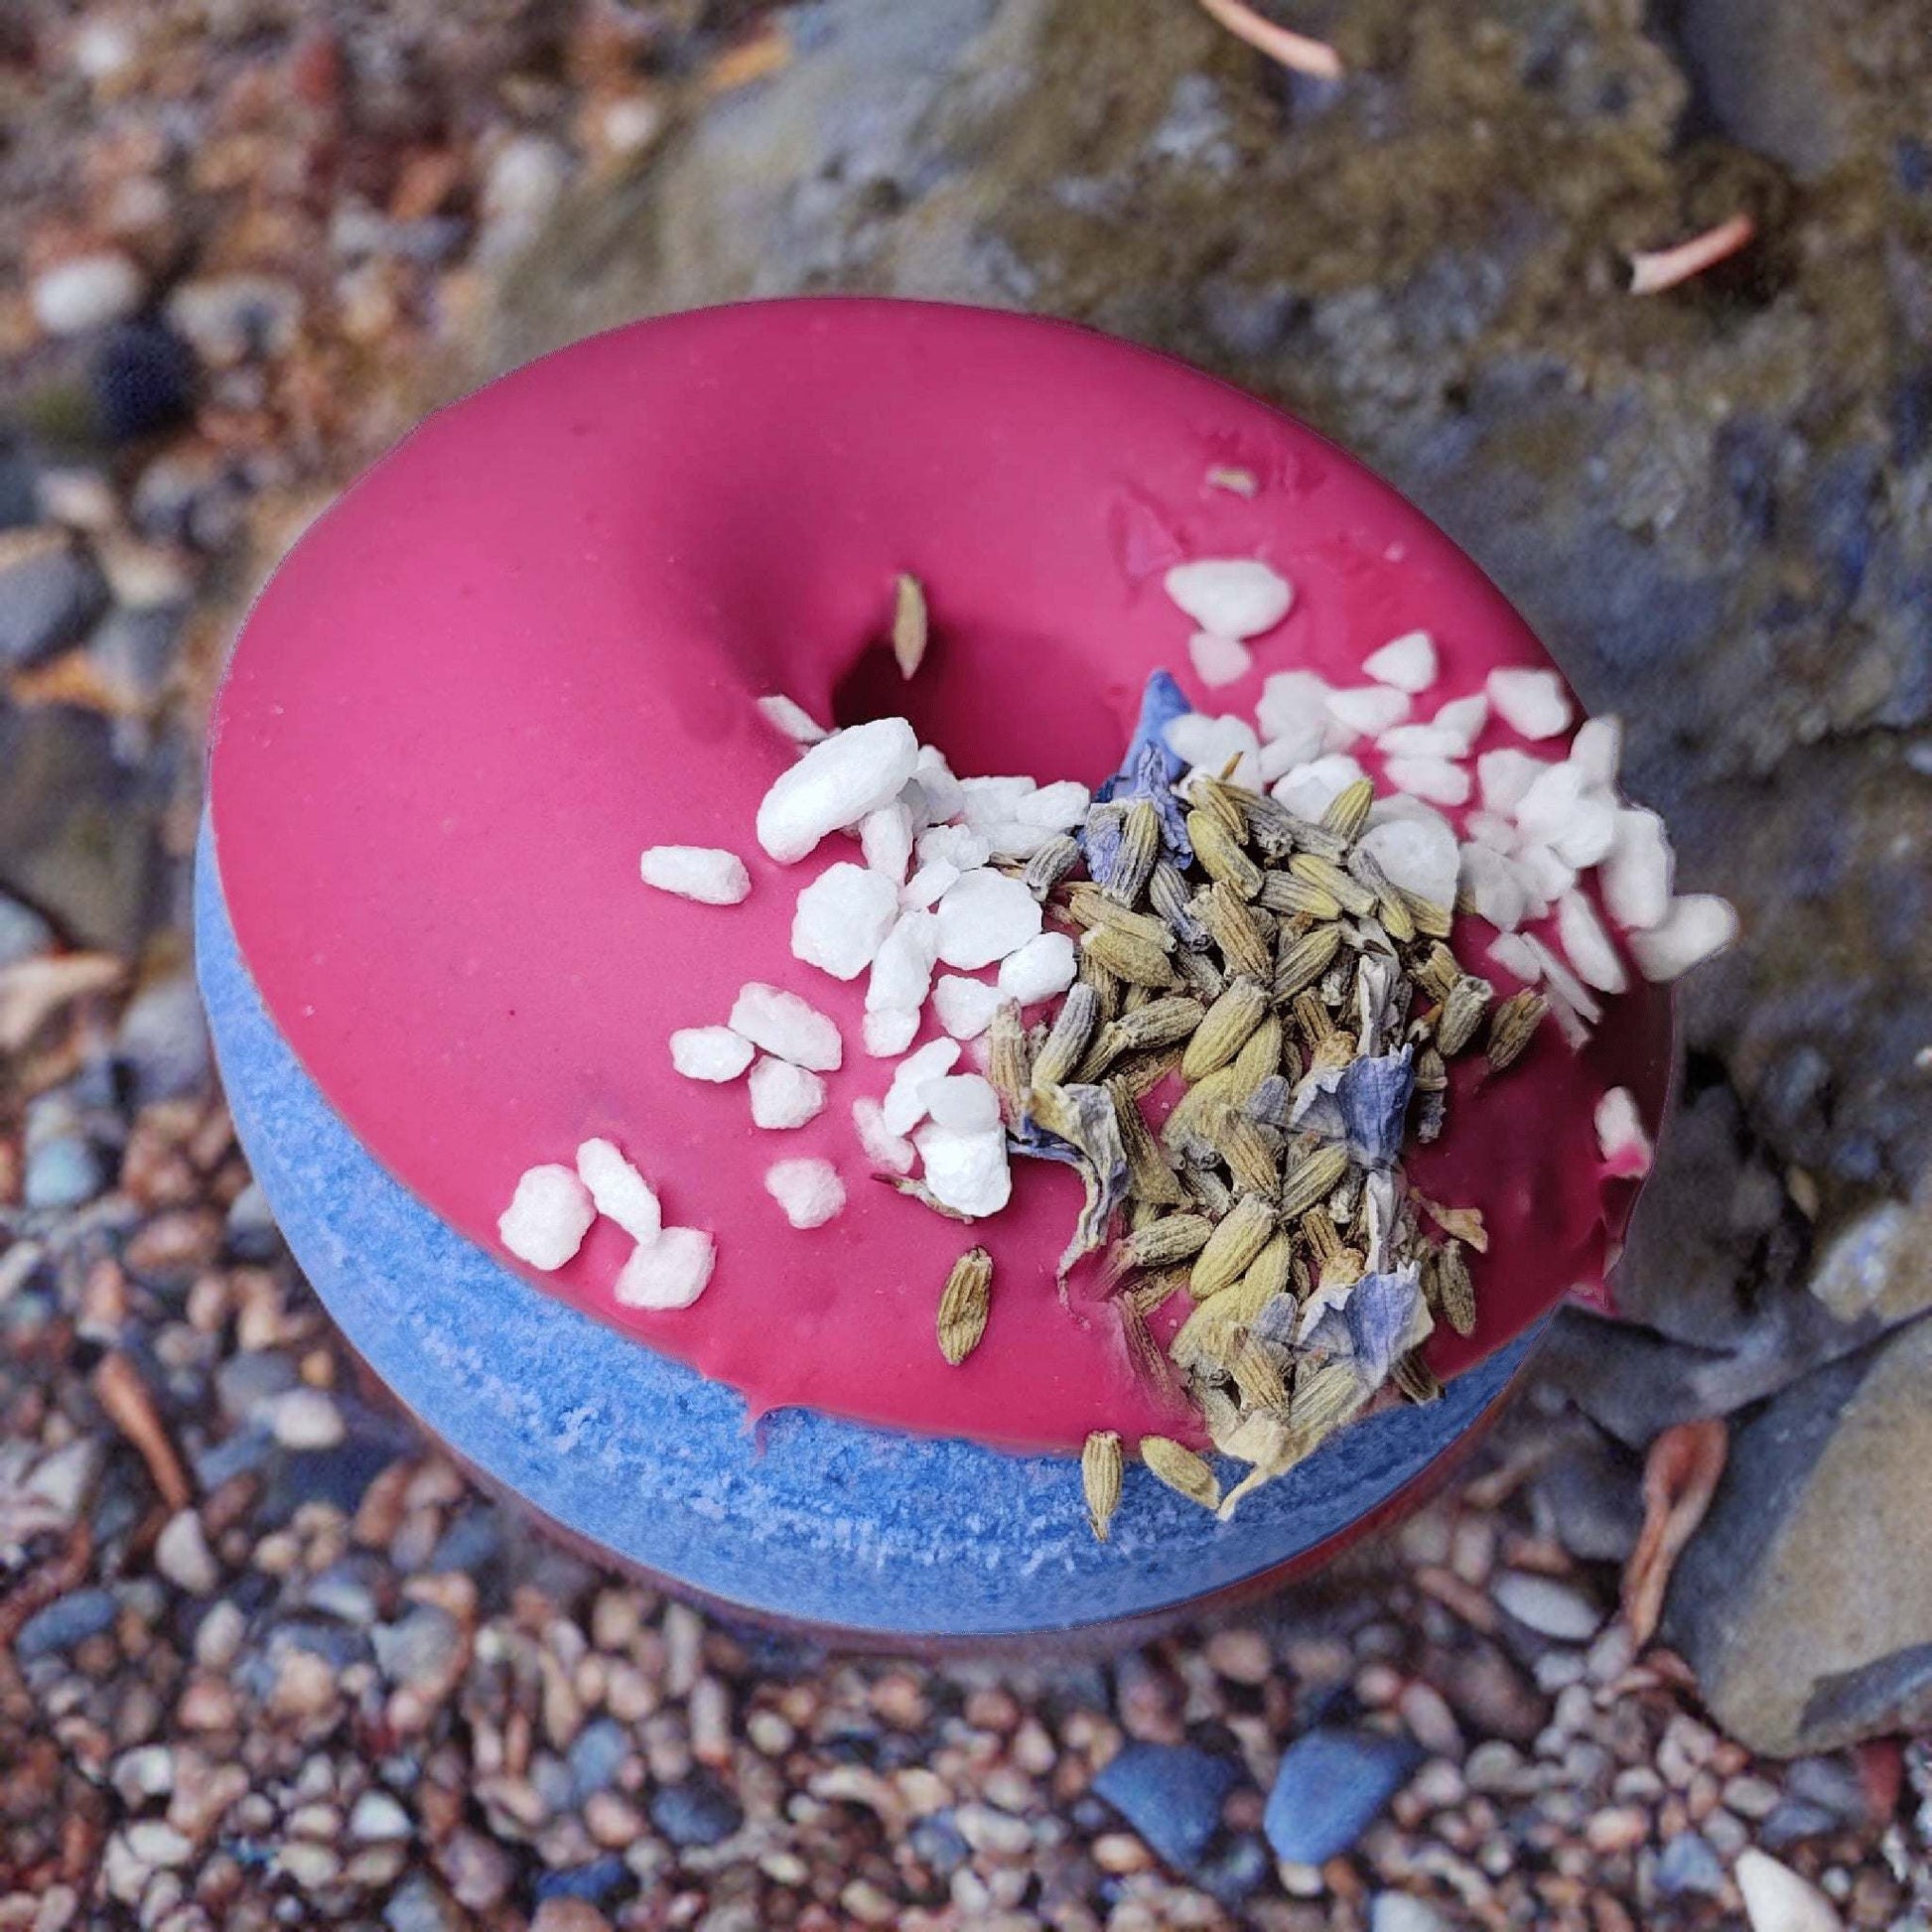 Experience relaxation at its finest with our Lavender Sea Donut Bath Bomb. Unwind and indulge!